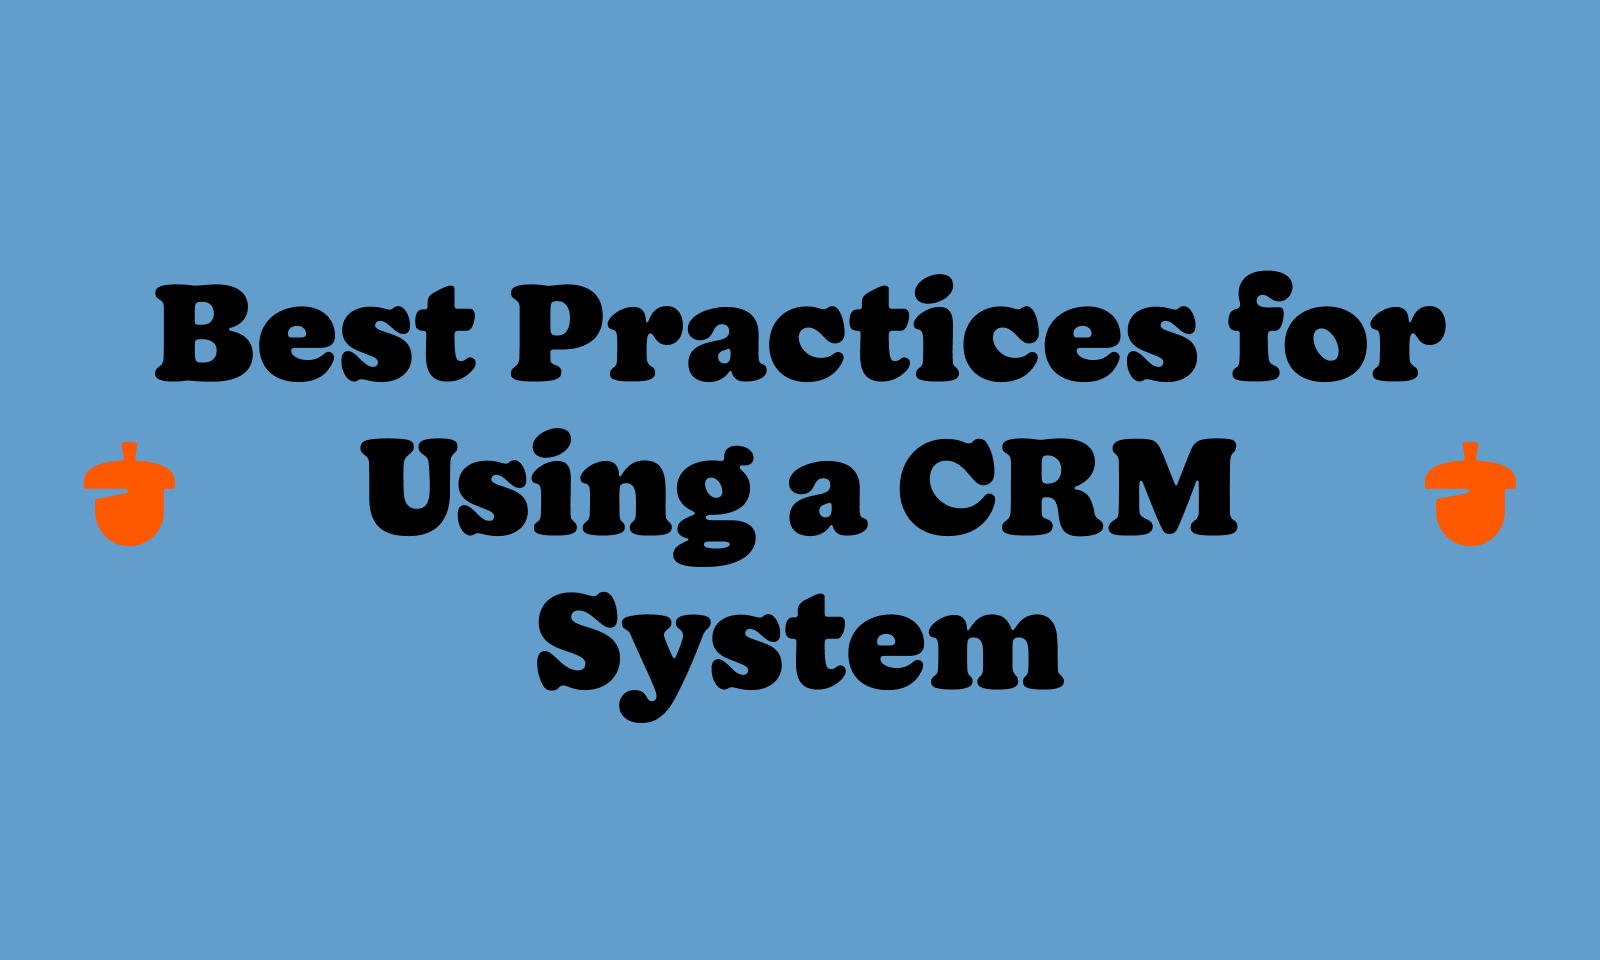 Best Practices for Using a CRM System guide